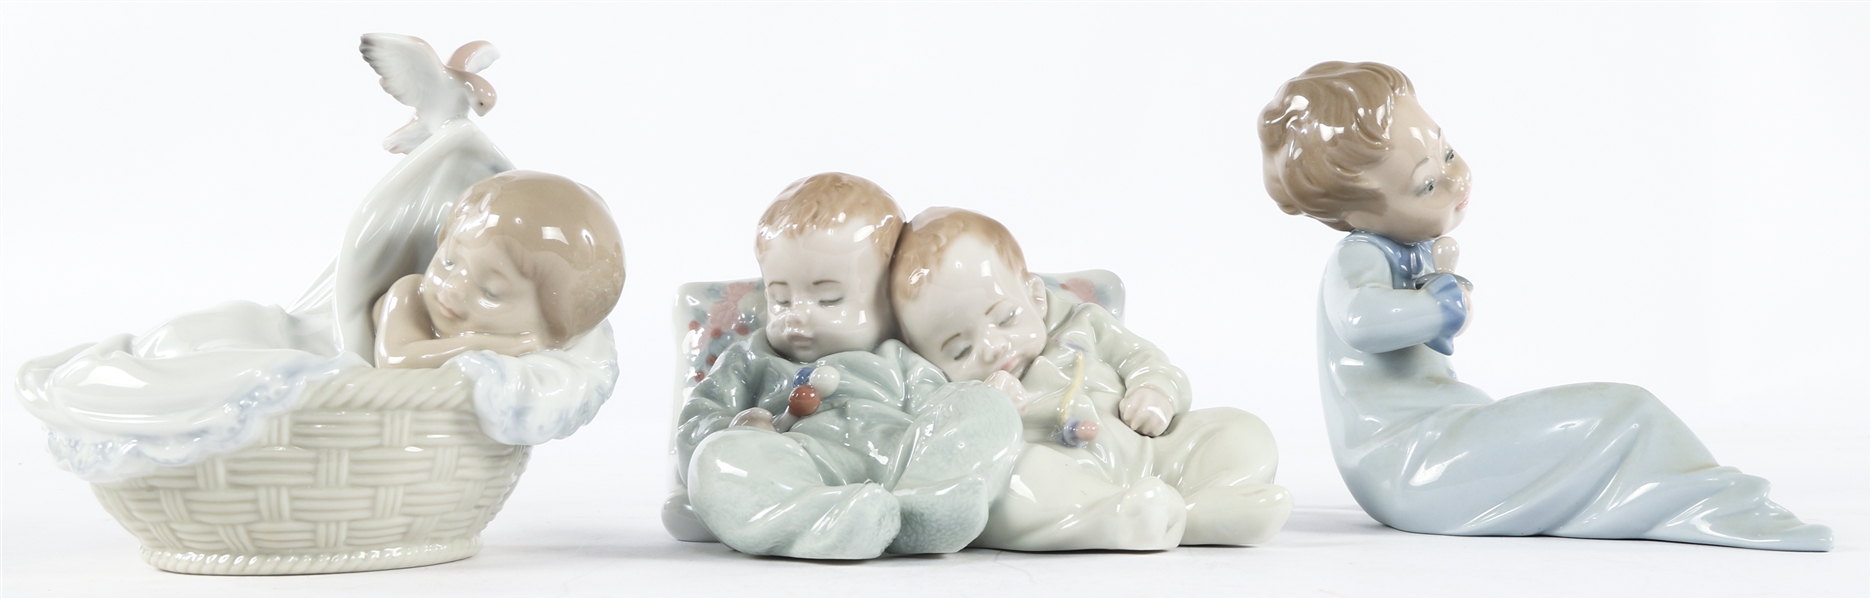 LLADRO PORCELAIN BABY FIGURINES - LOT OF 3